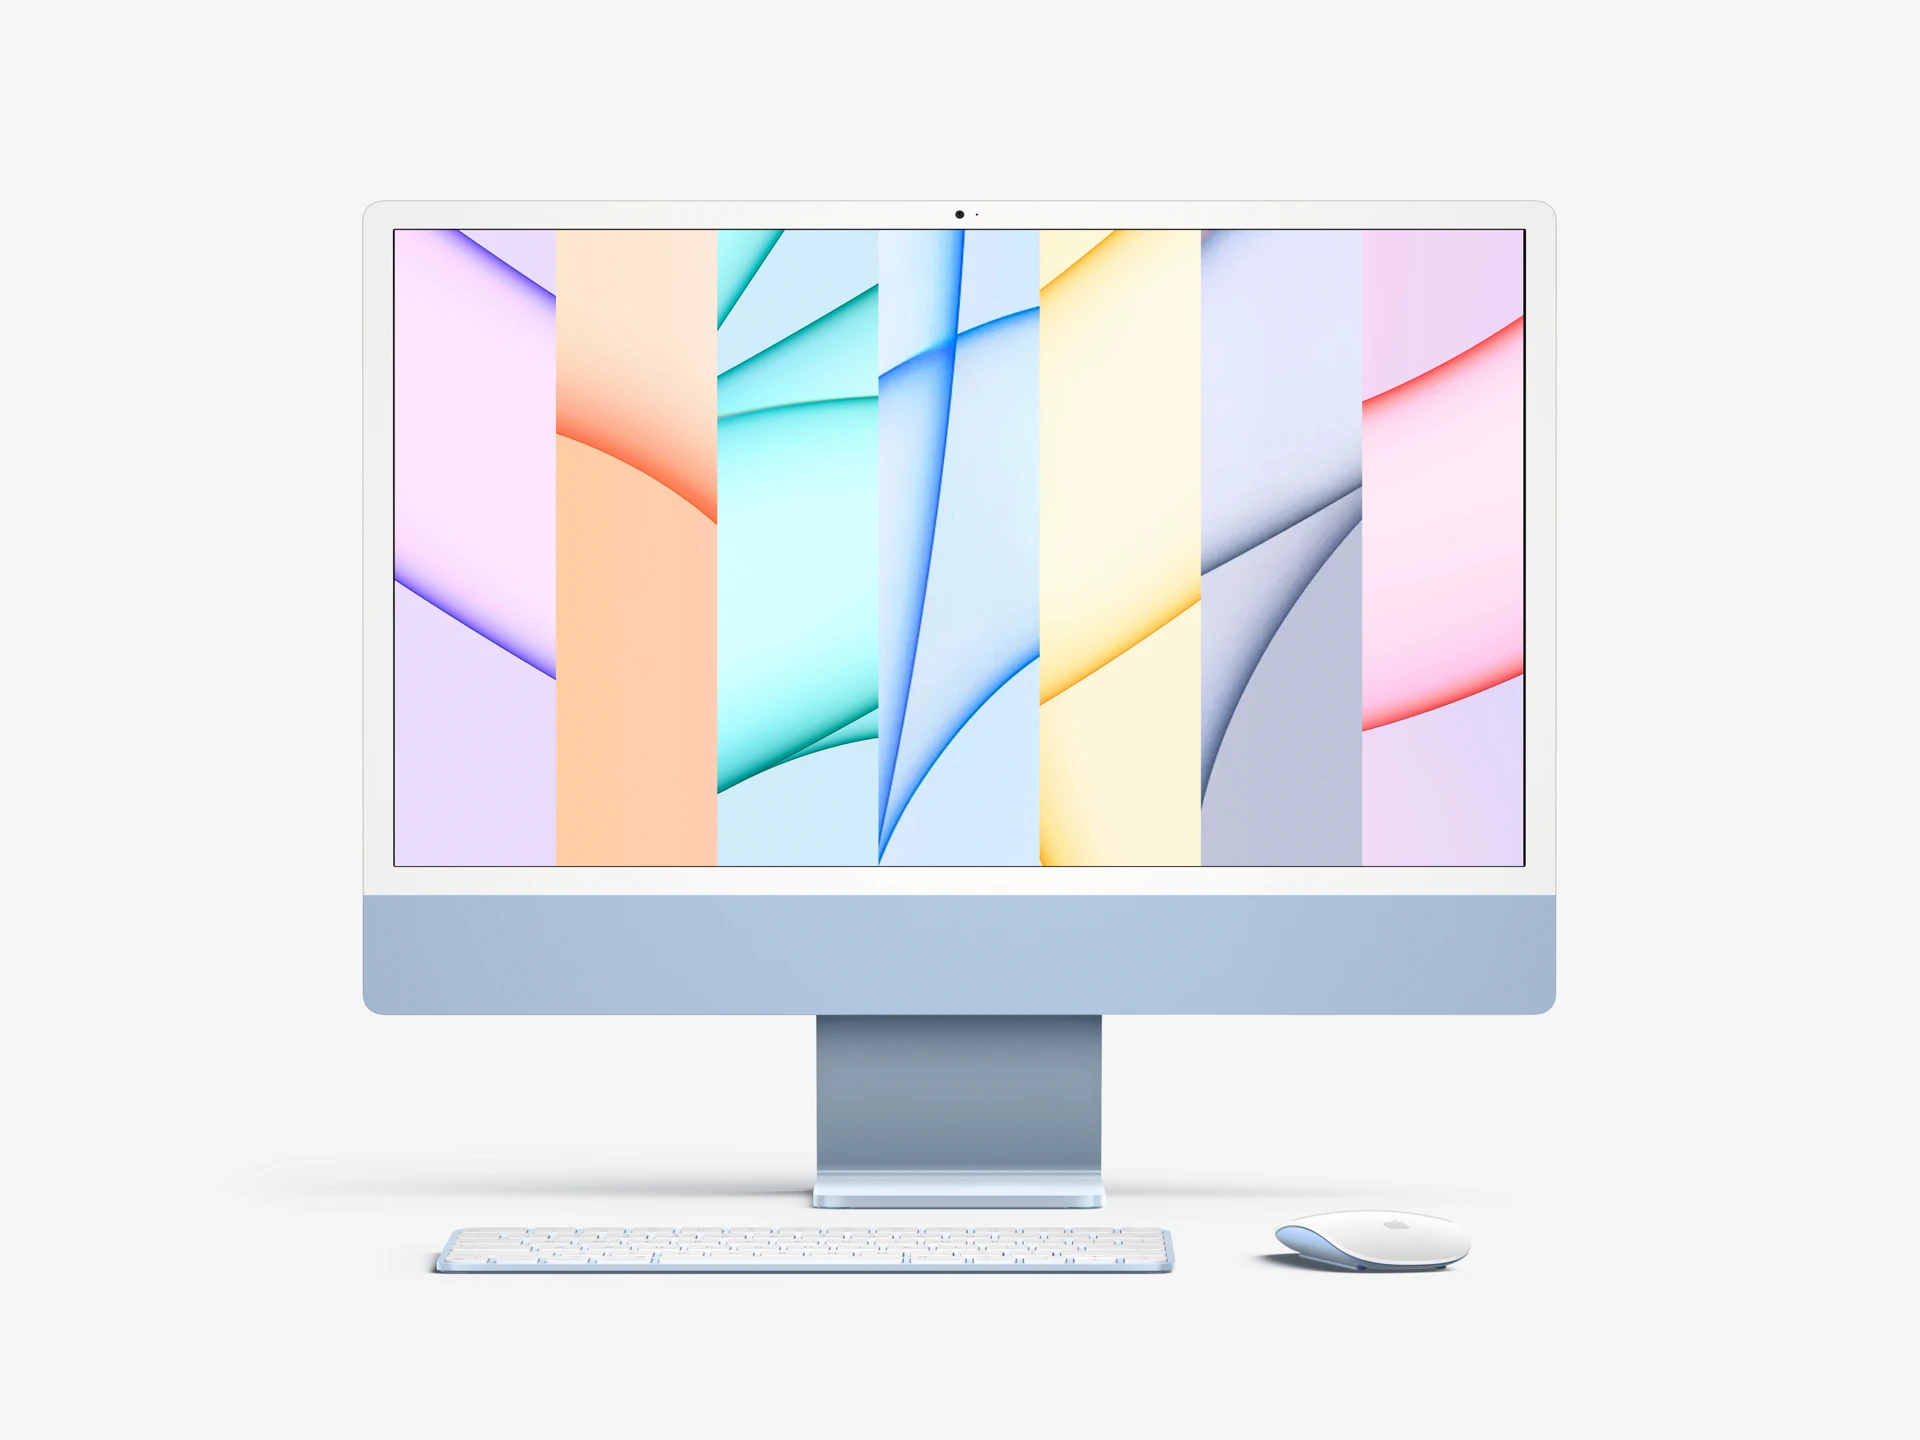 Free iMac 24-inch Mockup (2021) - Meet the new iMac mockup in a premium quality and 7 color styles. You can easily customize this photorealistic mockup, thanks to smart layers function.